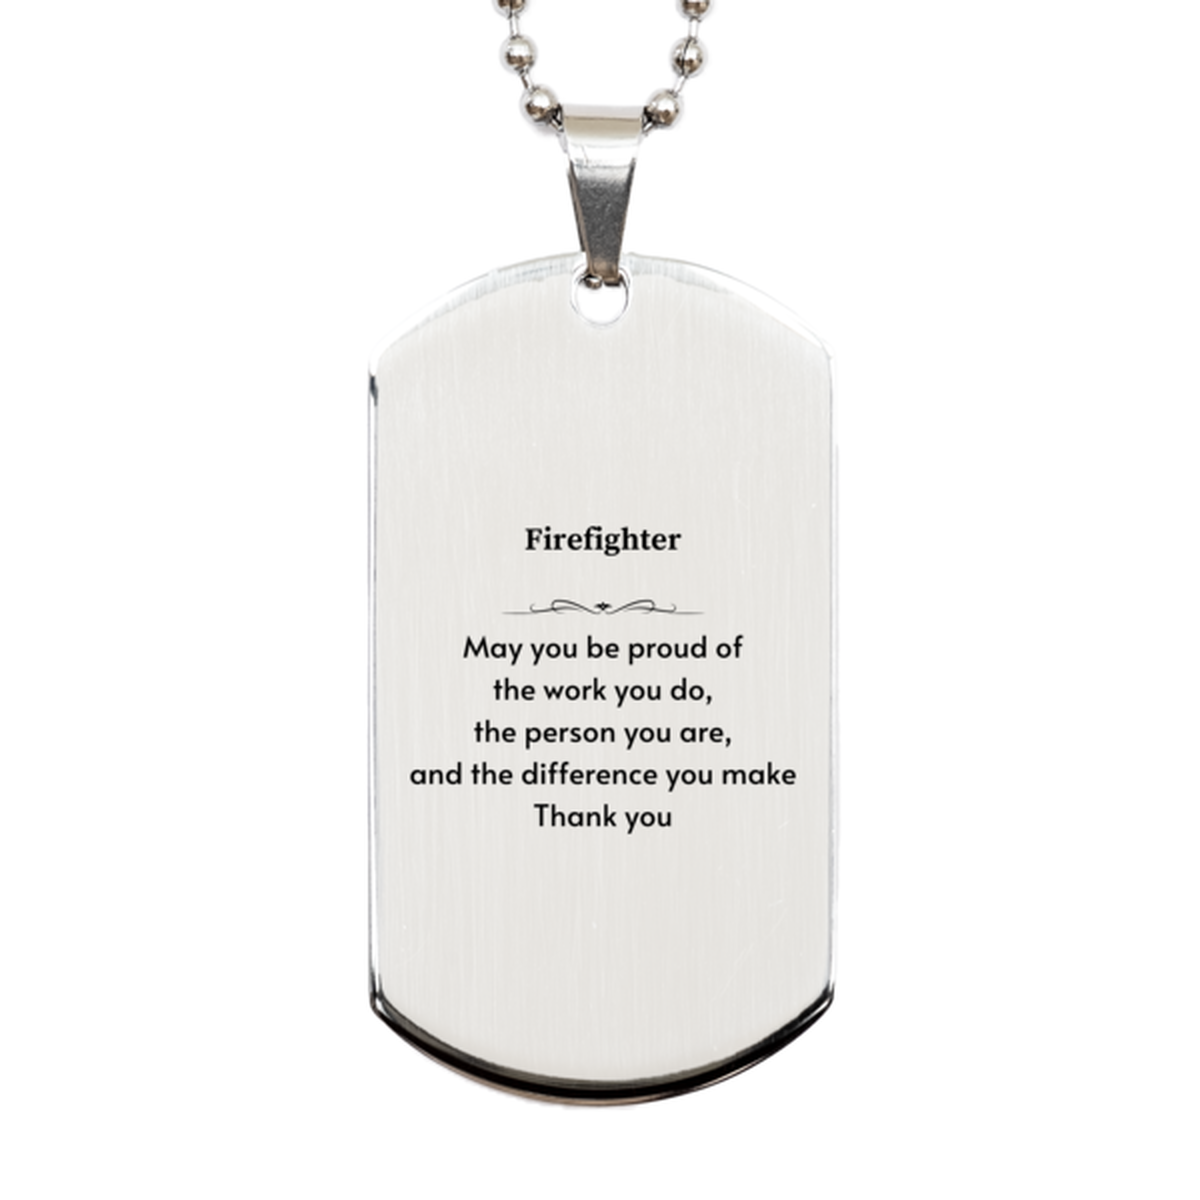 Heartwarming Silver Dog Tag Retirement Coworkers Gifts for Firefighter, Firefighter May You be proud of the work you do, the person you are Gifts for Boss Men Women Friends